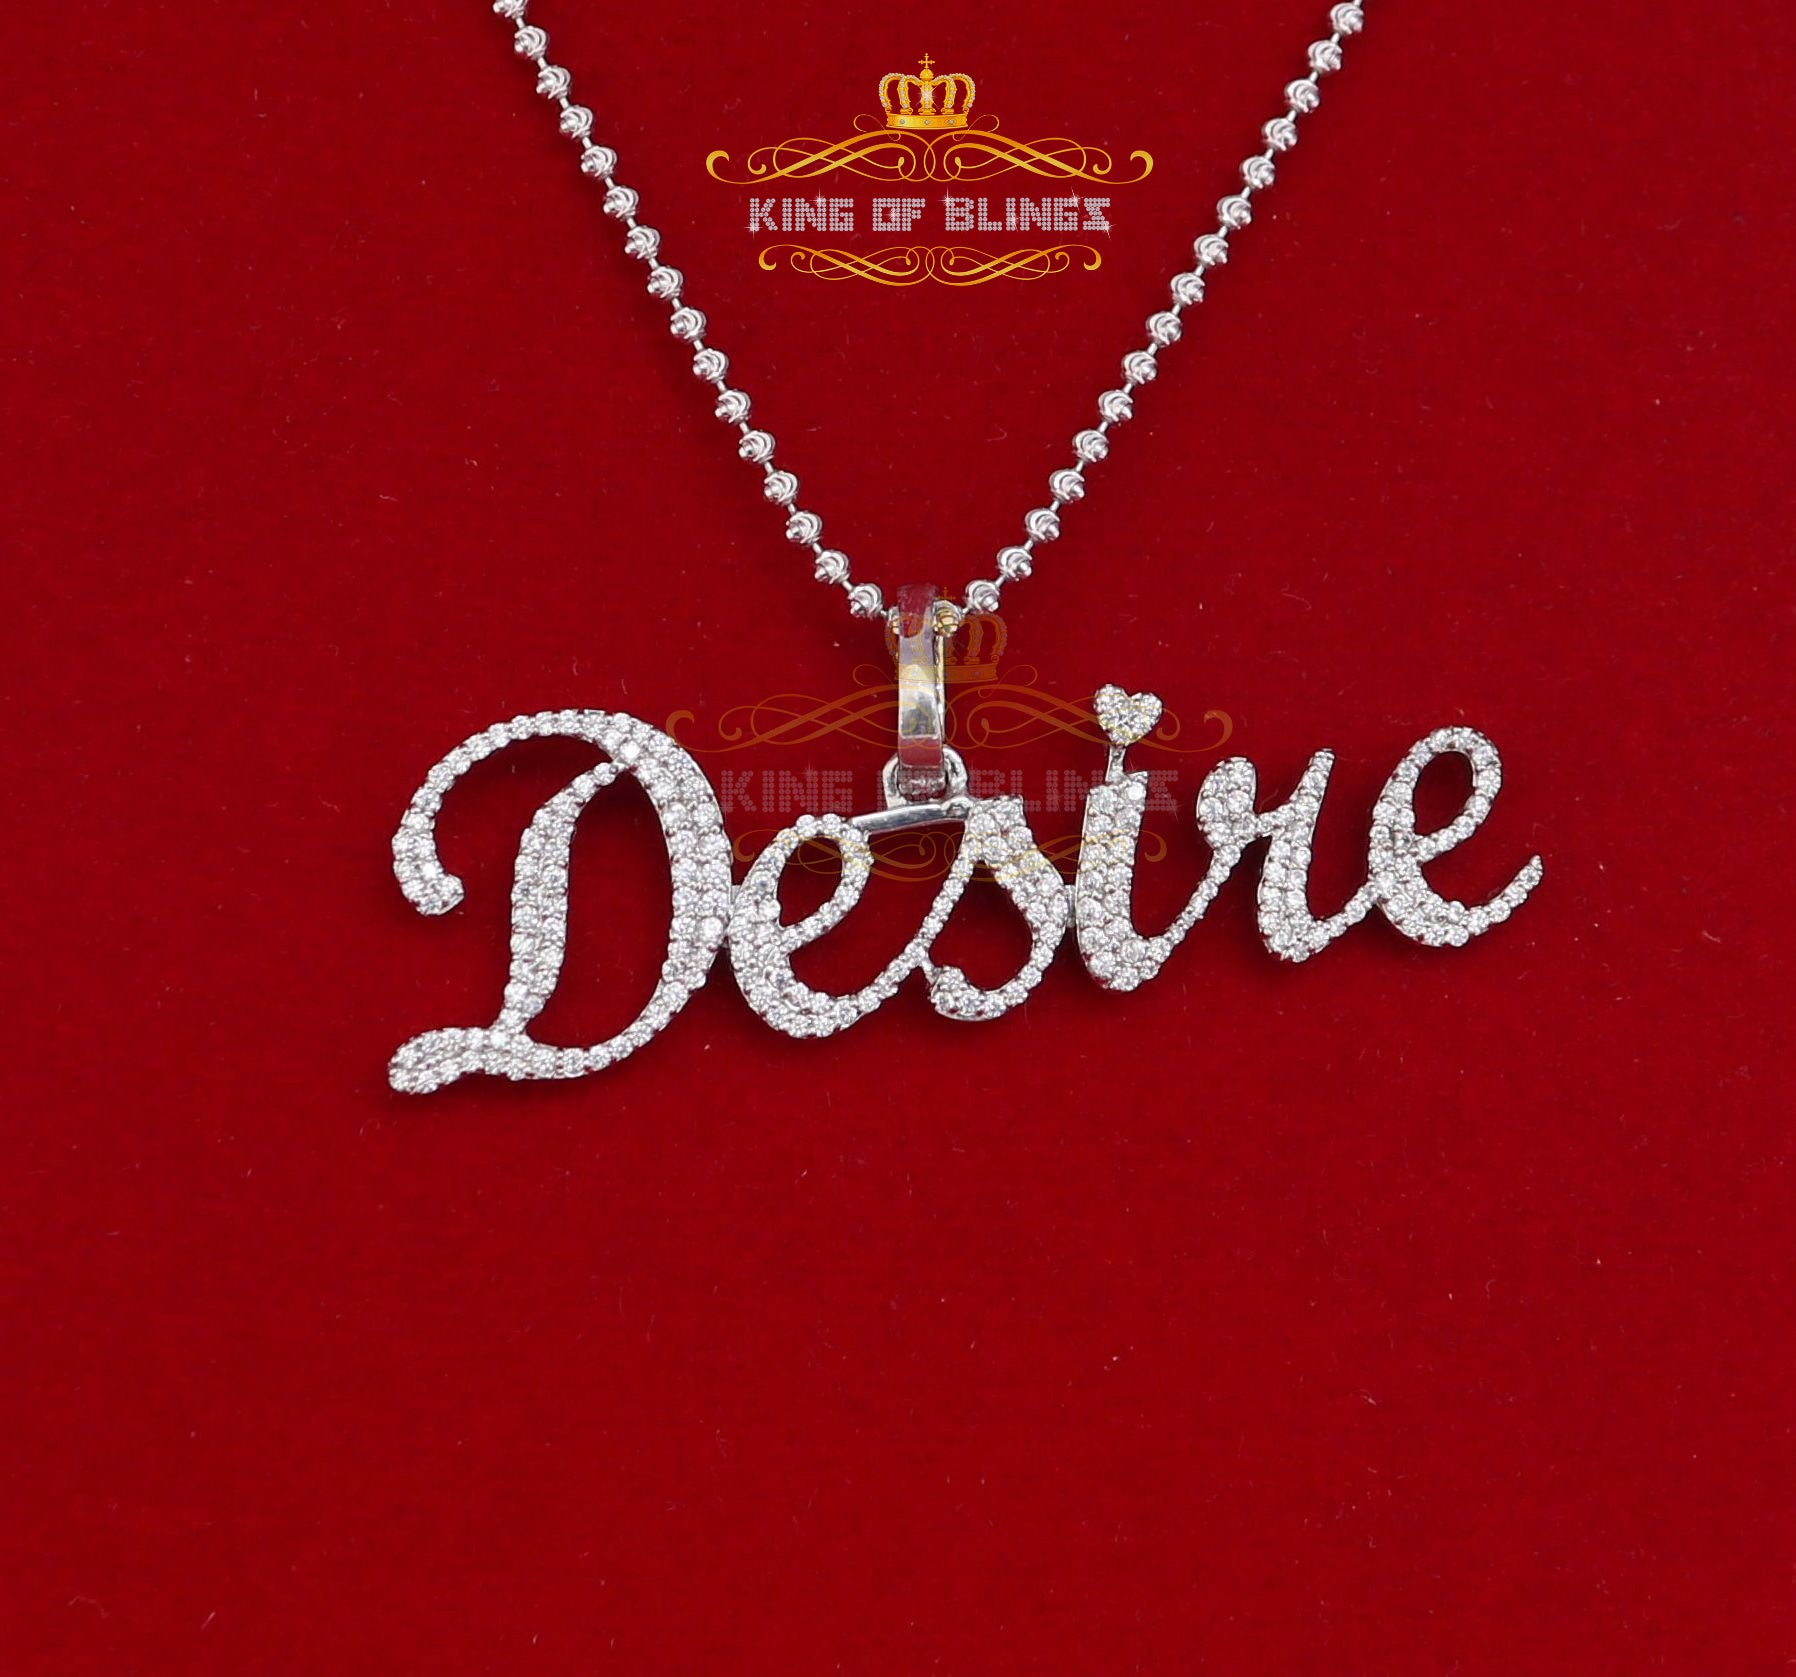 White Desire Letter 925 Sterling Silver Pendant 2.49ct Cubic Zirconia stone KING OF BLINGS